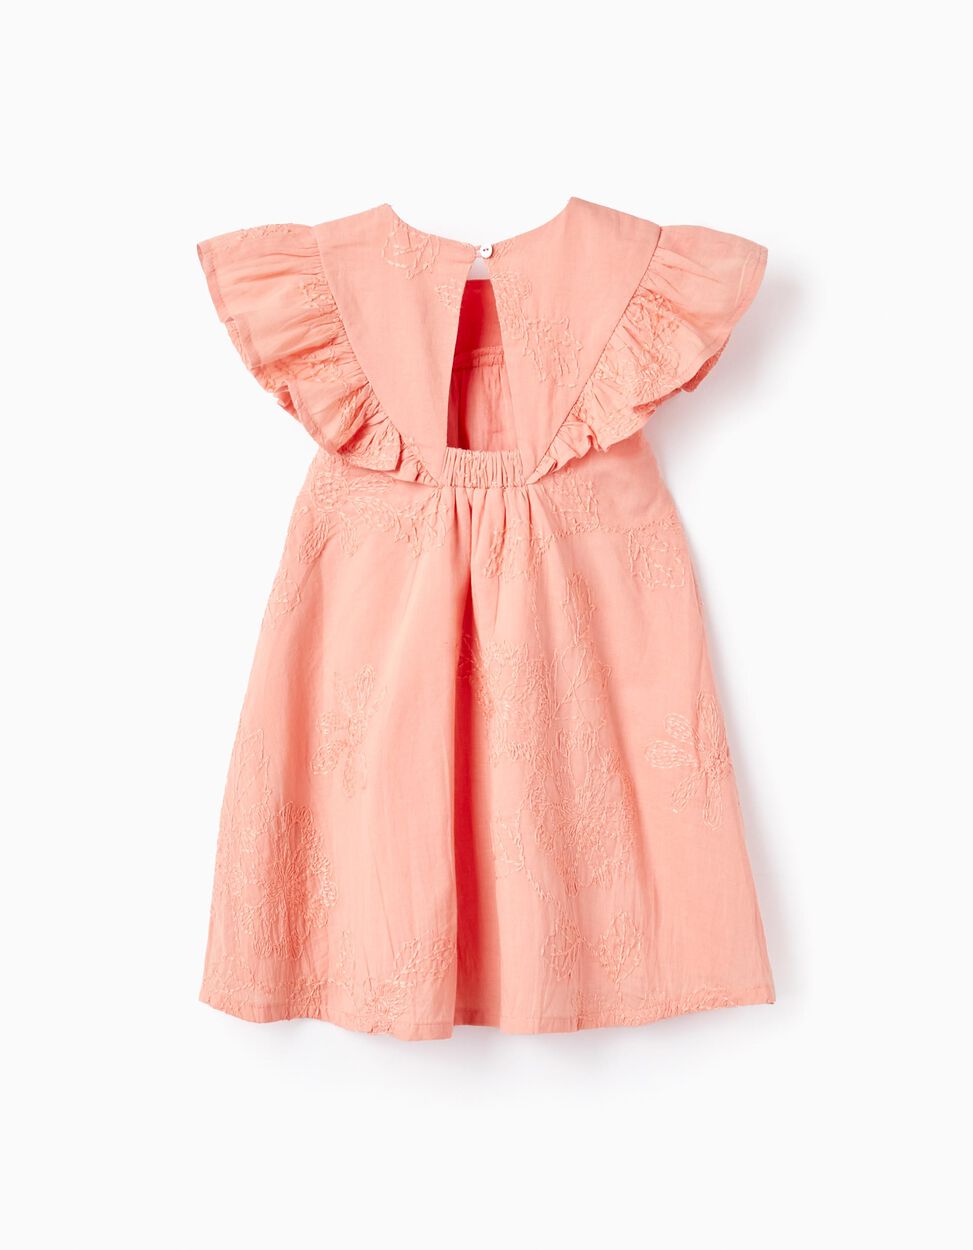 Buy Online Cotton Dress with Embroidery and Ruffles for Baby Girls, Coral